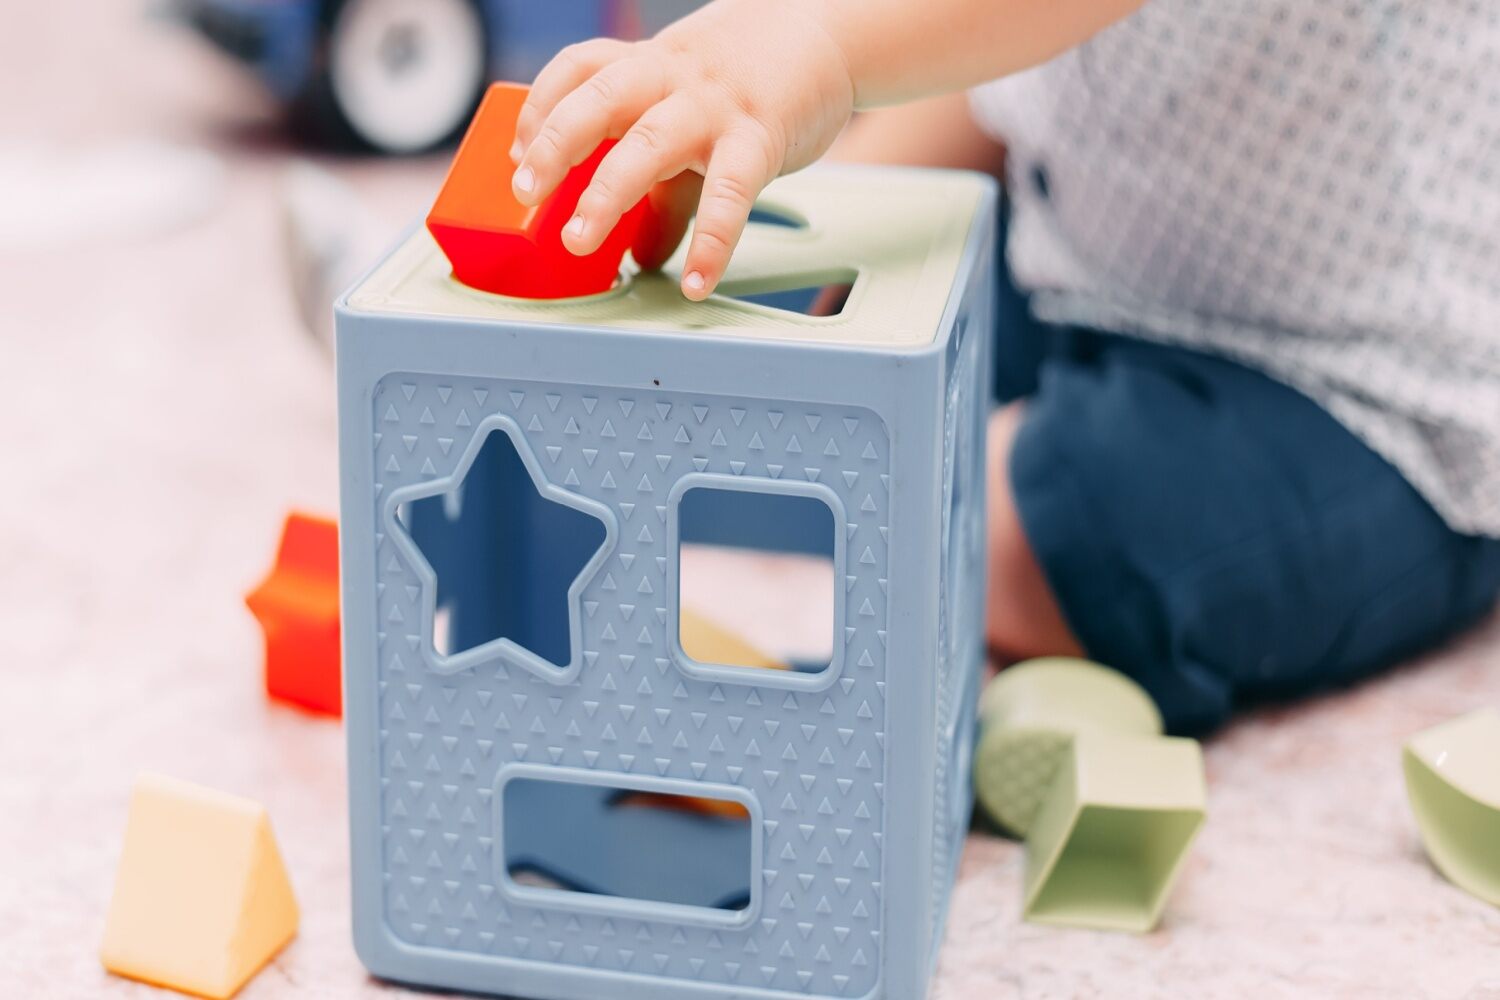 Toddler playing with shape sorter toy